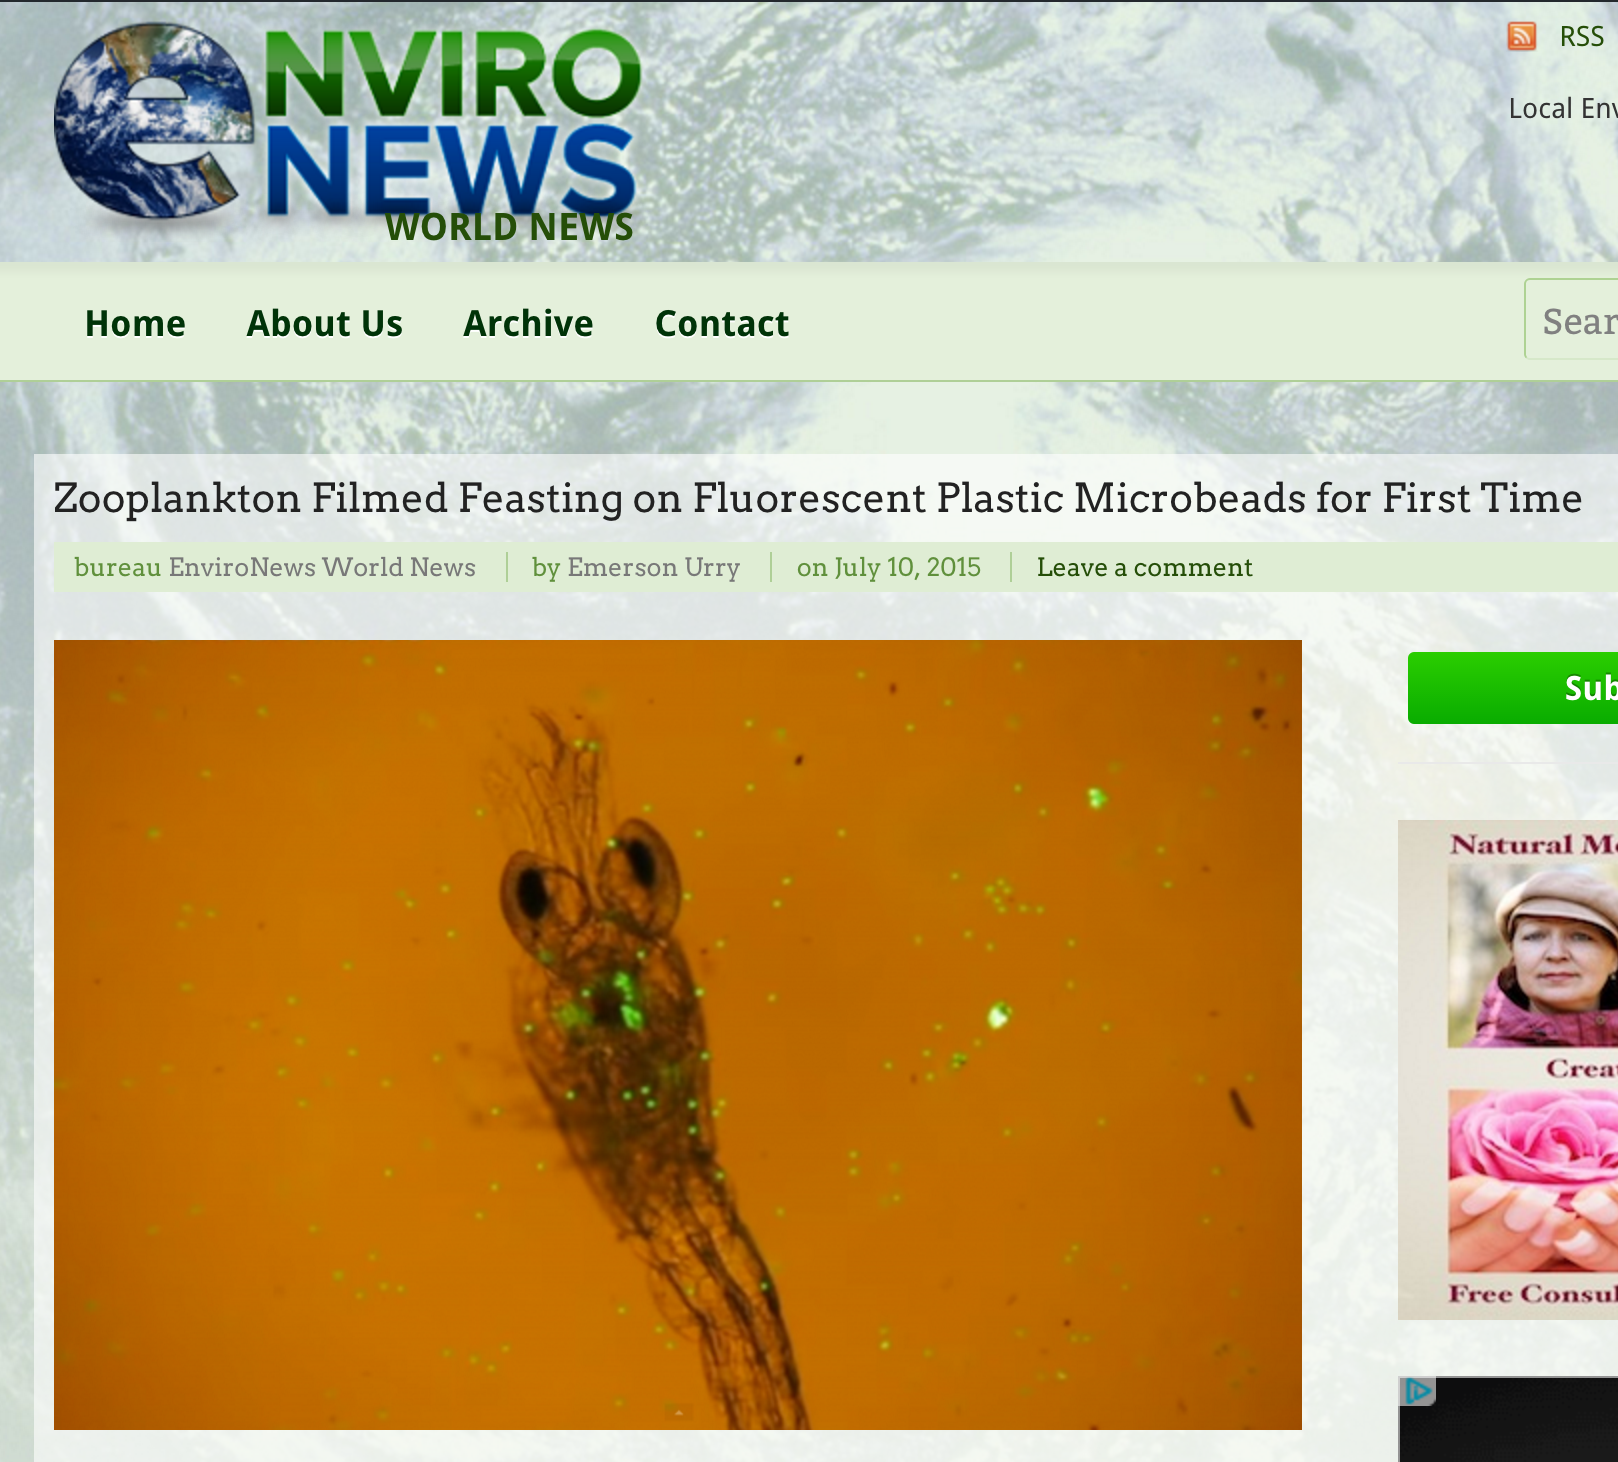 EnviroNews Headline: Zooplankton Filmed Feasting on Fluorescent Plastic Microbeads for First Time